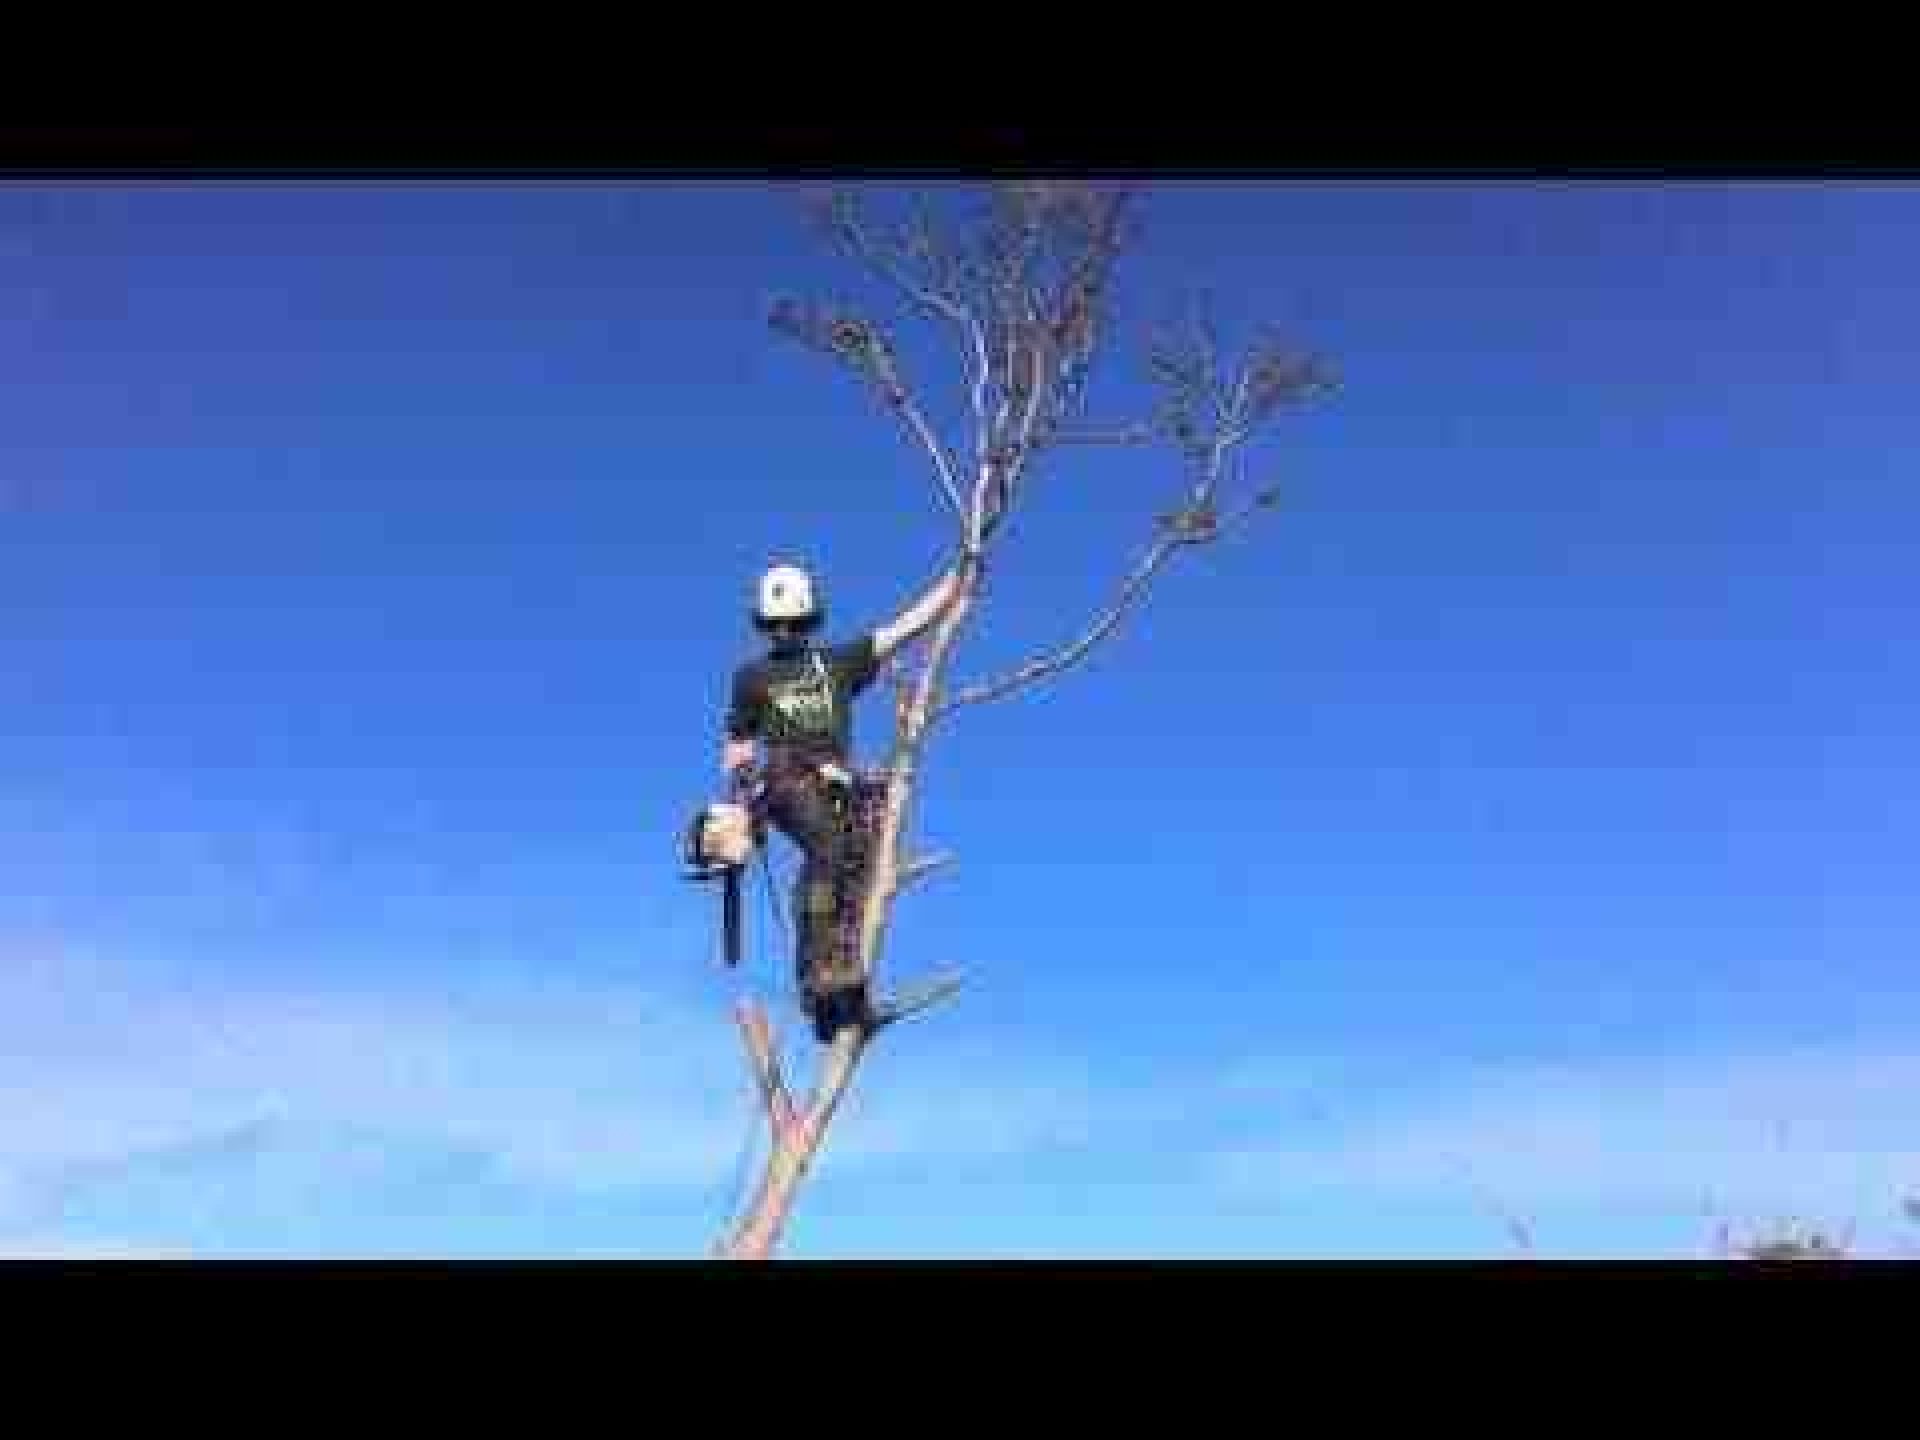 Seaford's Tree Removal Experts - Cut It Right Tree Services